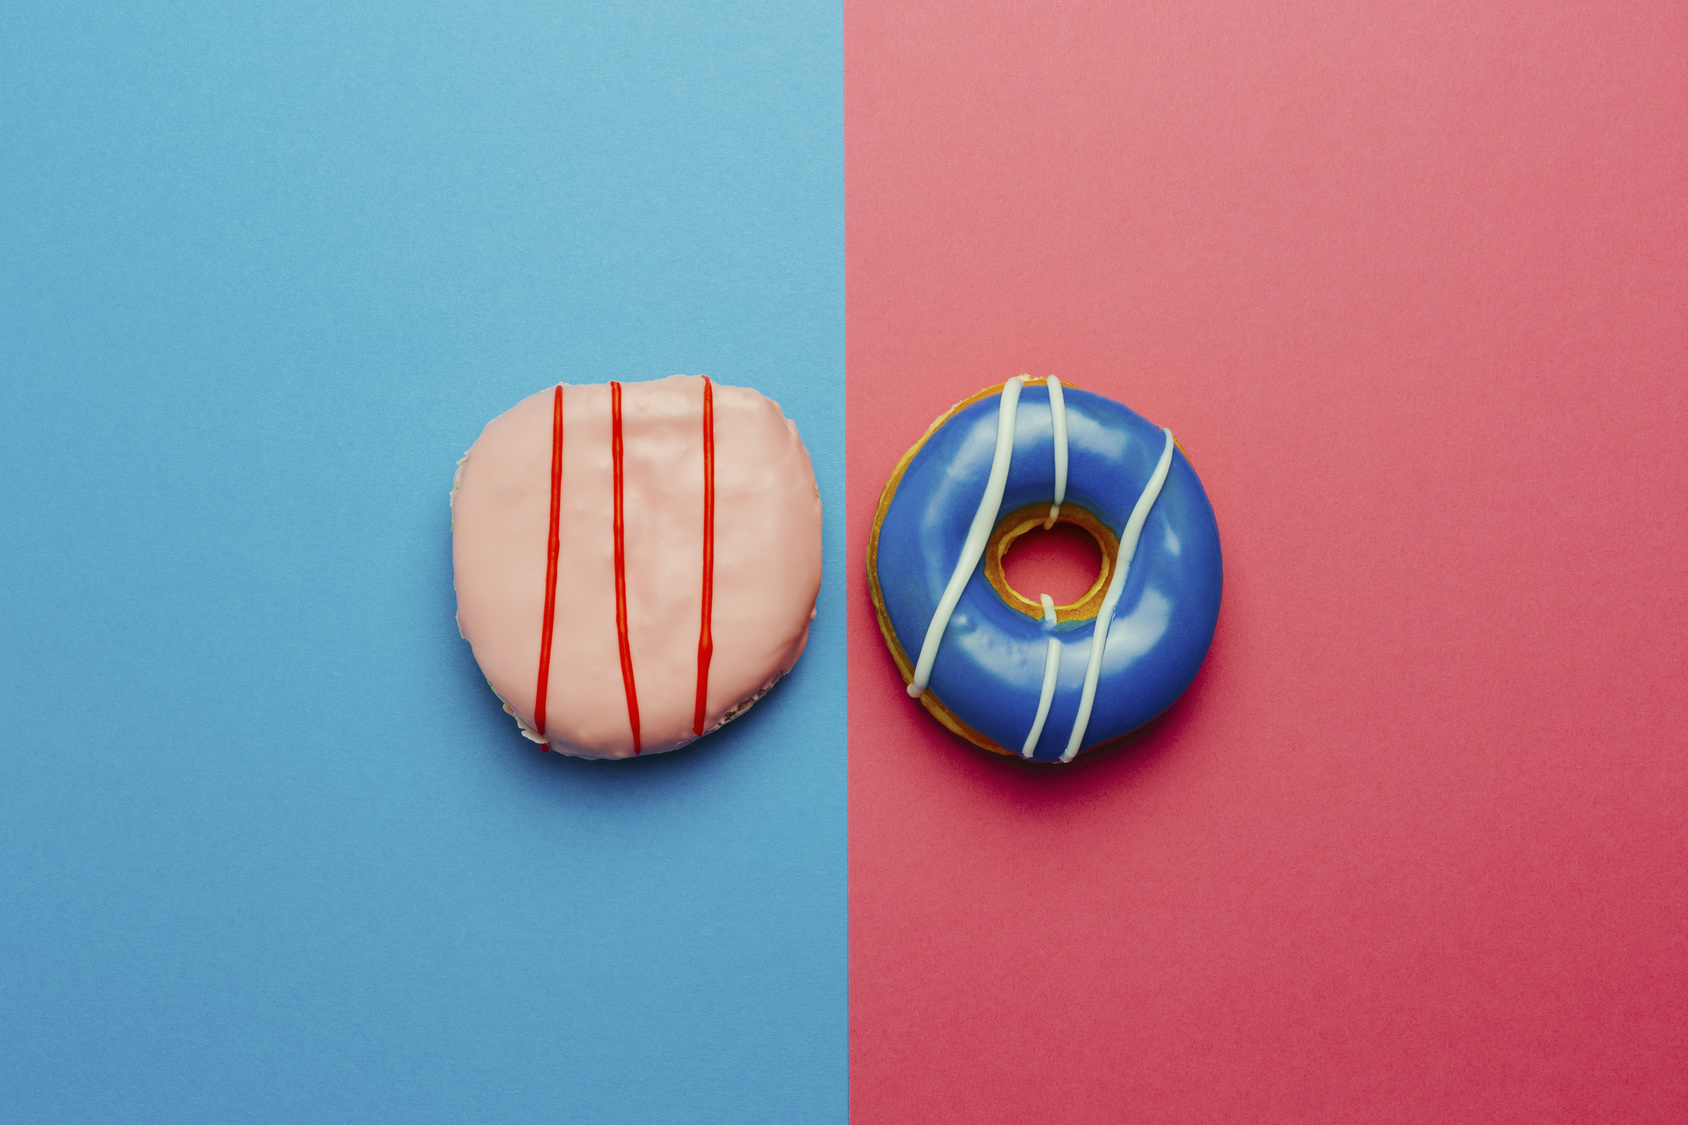 Directly above shot of donuts on colored background